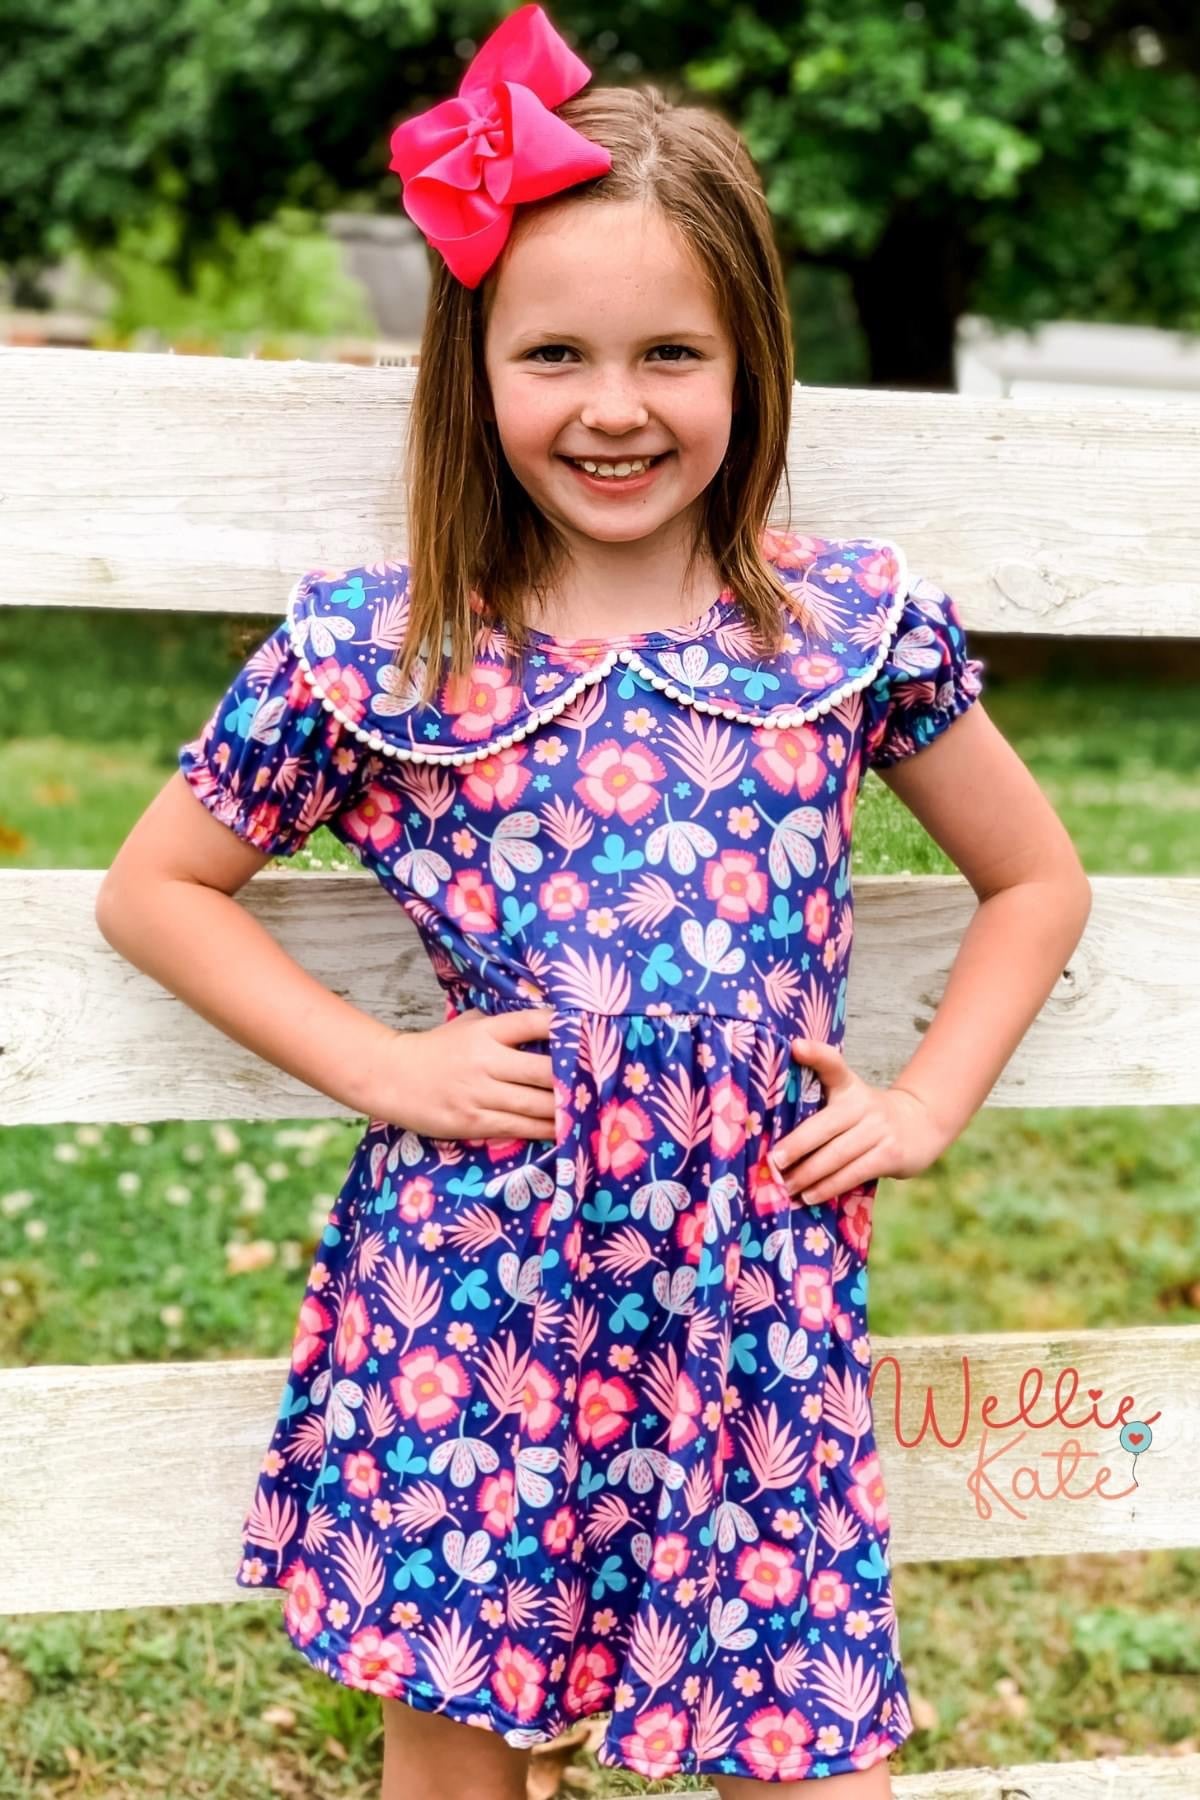 Pink Floral Dress by Wellie Kate